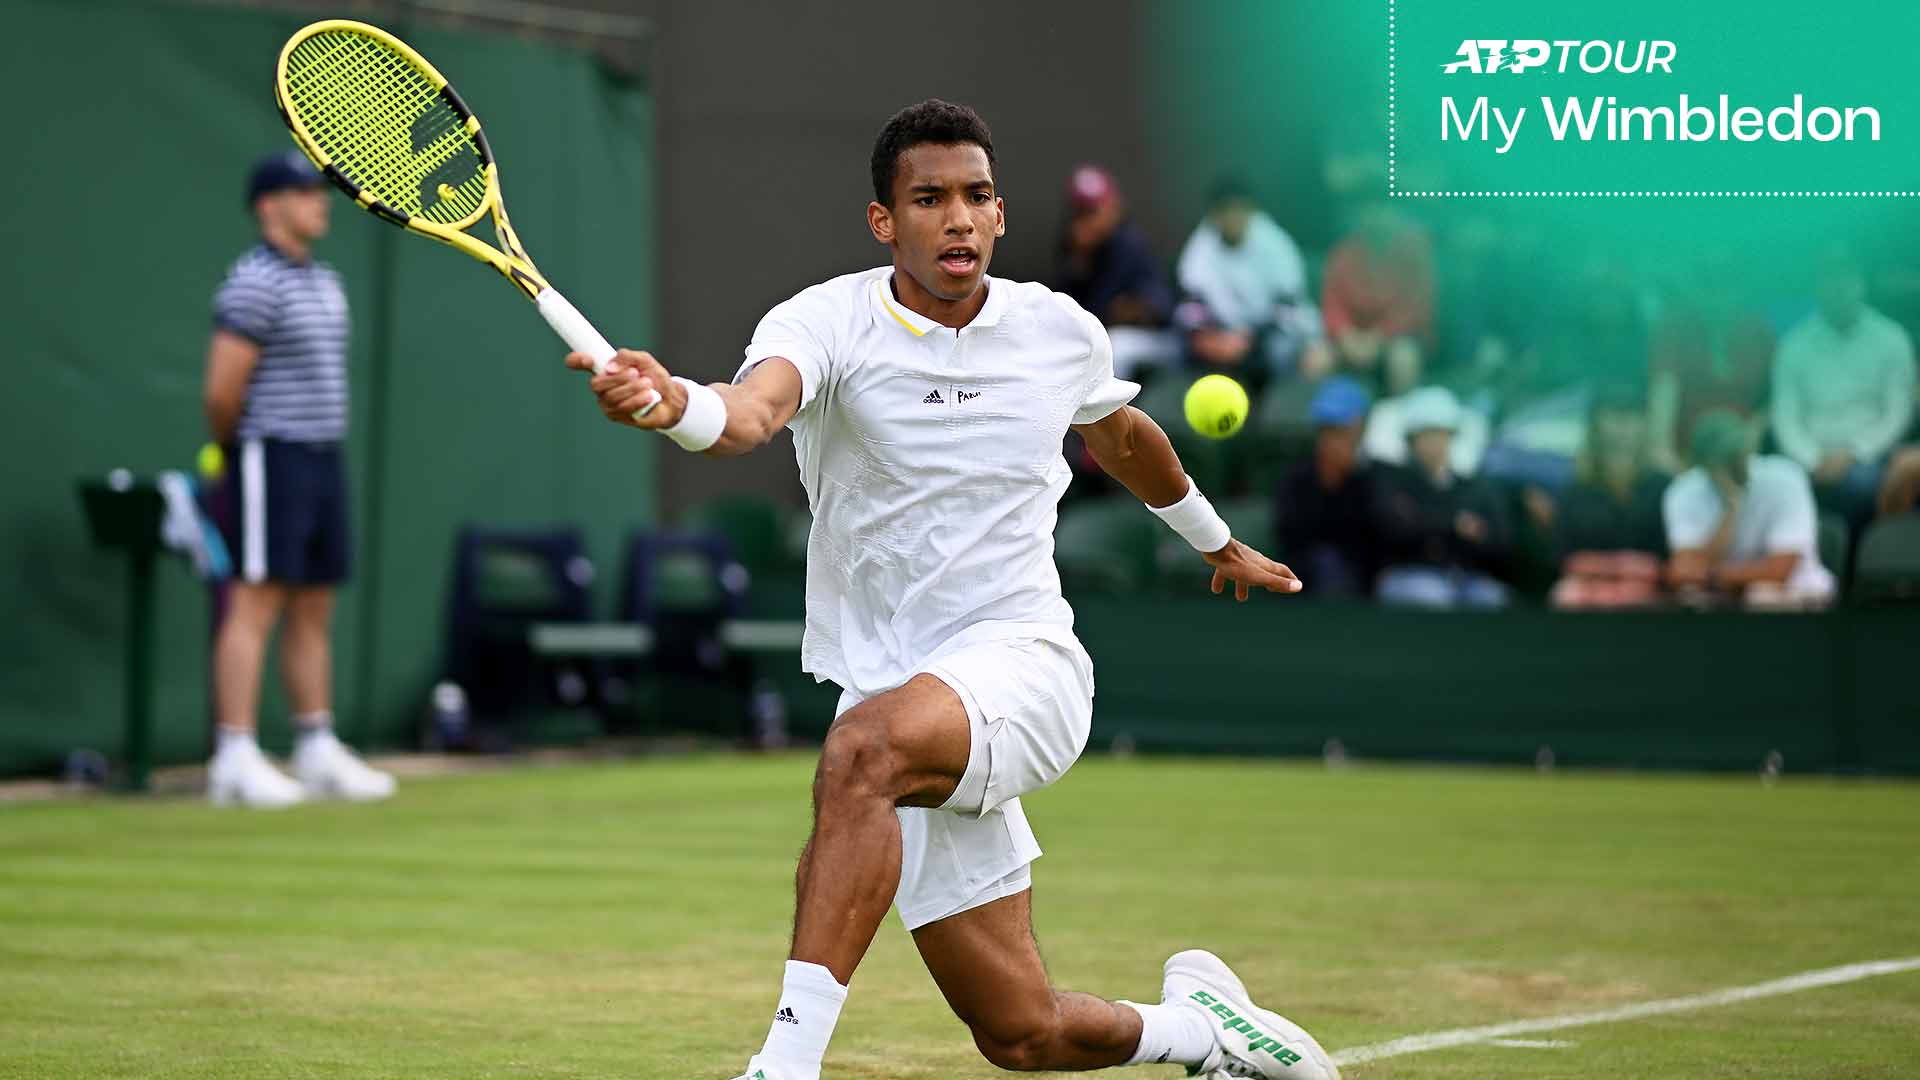 Felix Auger-Aliassime fell in the Wimbledon first round last year following a quarter-final run in 2021.